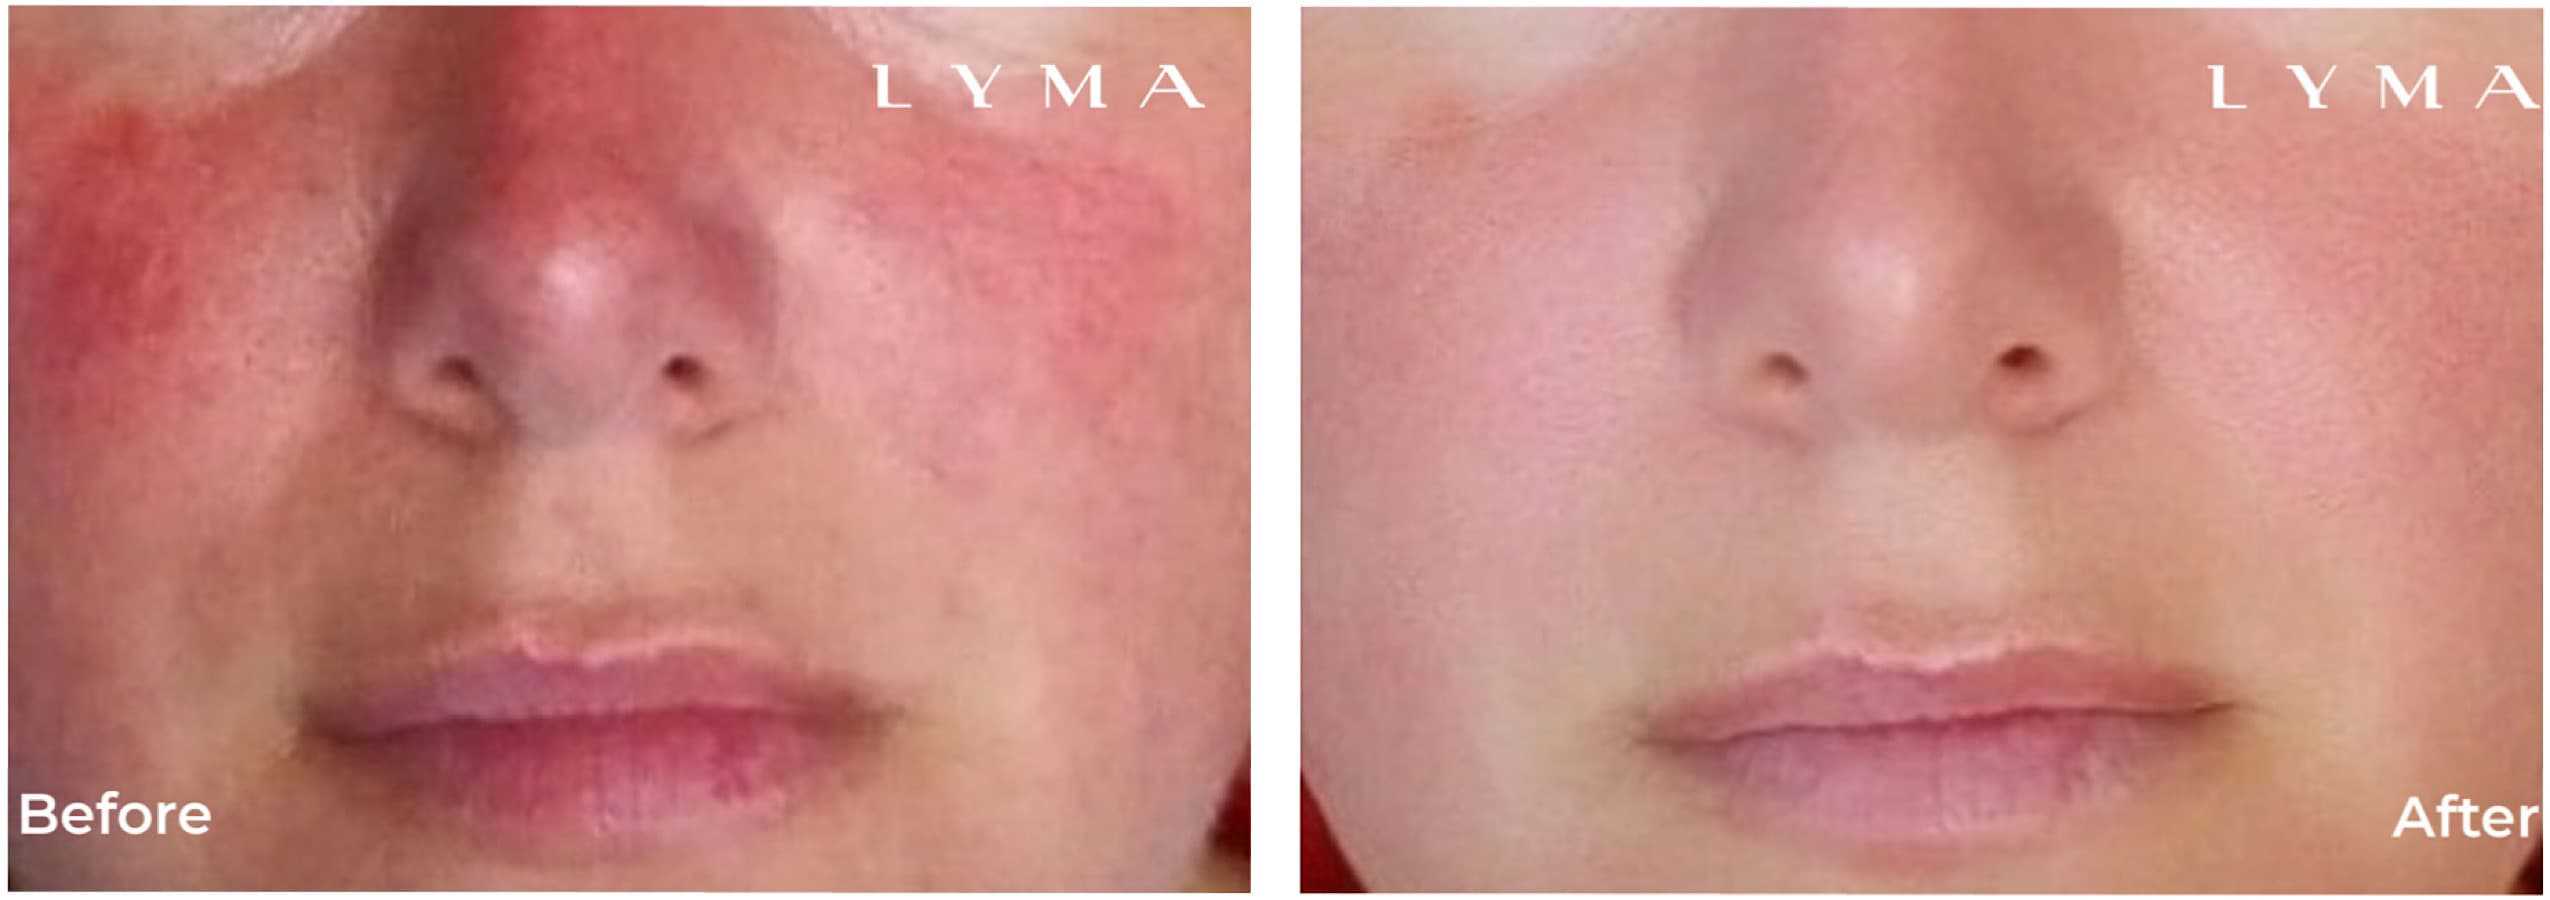 Before after rosacea pictures